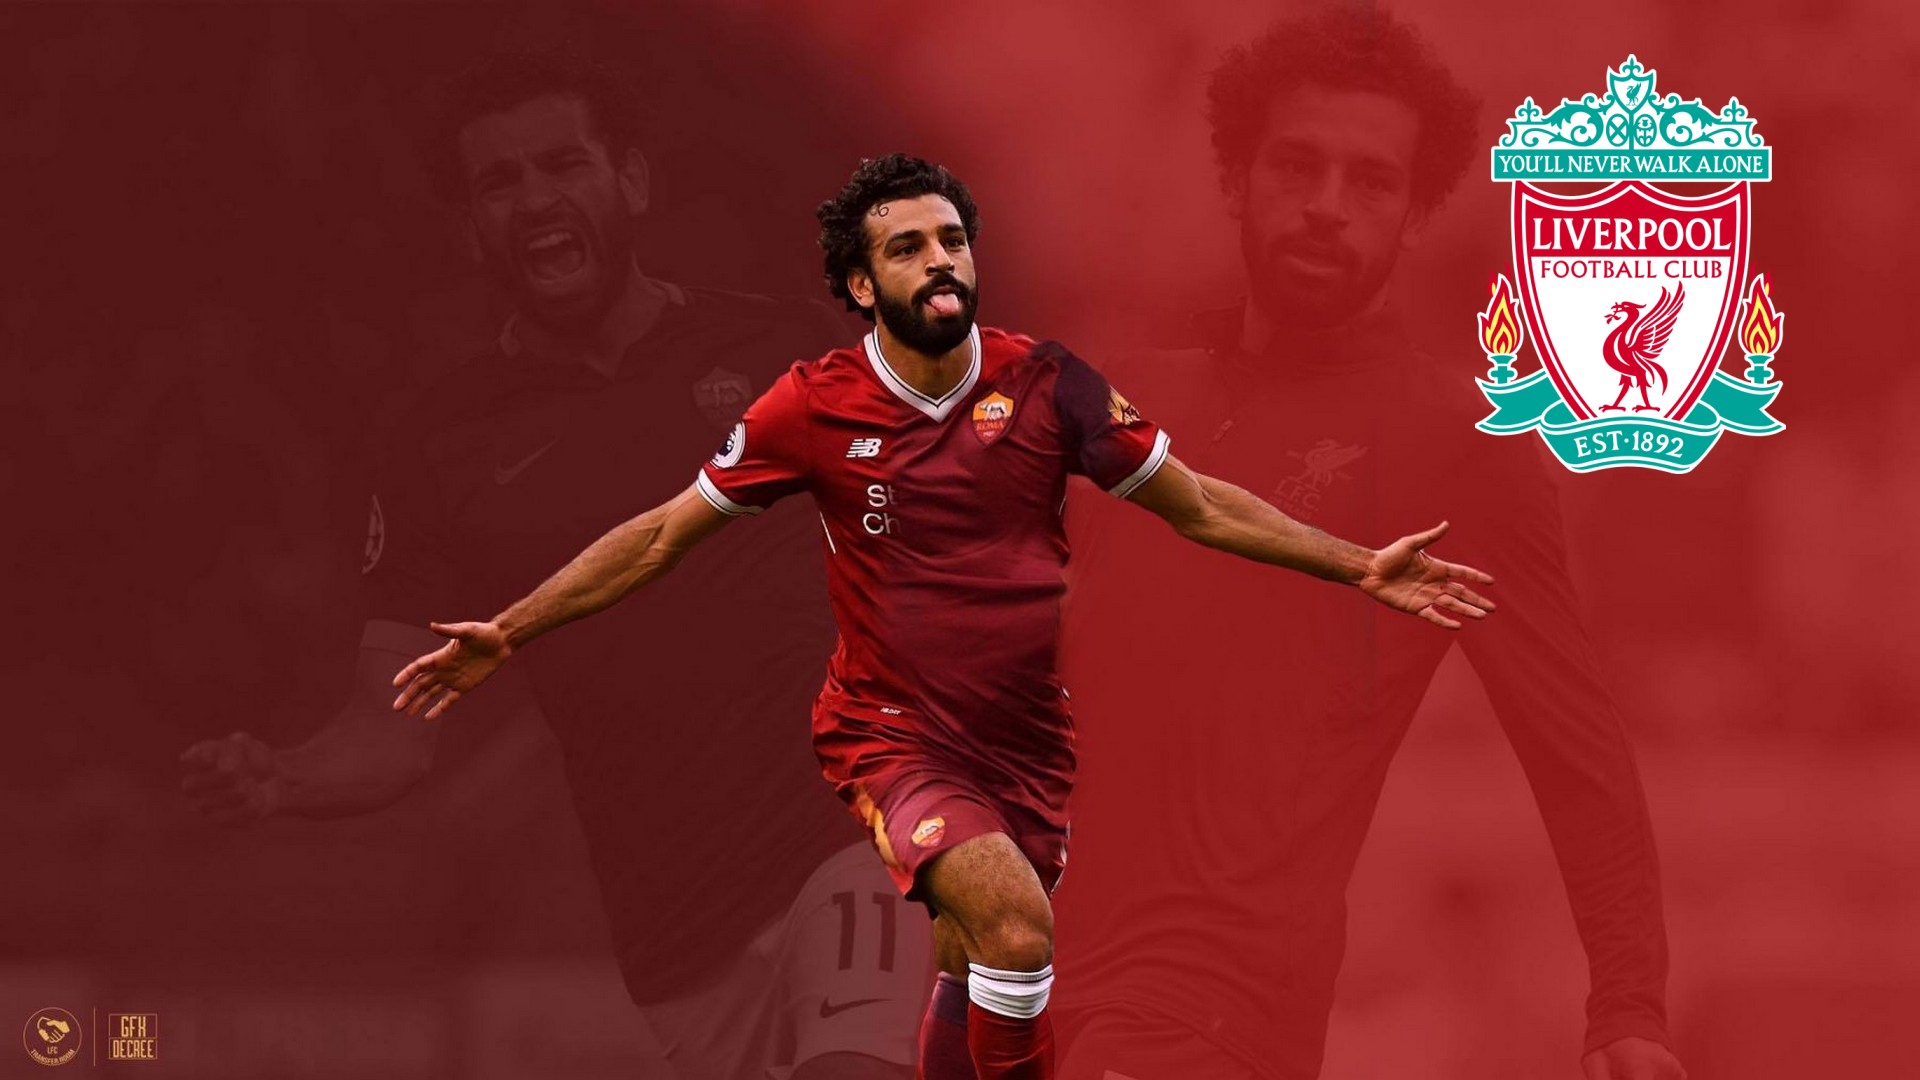 Liverpool Mohamed Salah Desktop Backgrounds HD with image resolution 1920x1080 pixel. You can use this wallpaper as background for your desktop Computer Screensavers, Android or iPhone smartphones